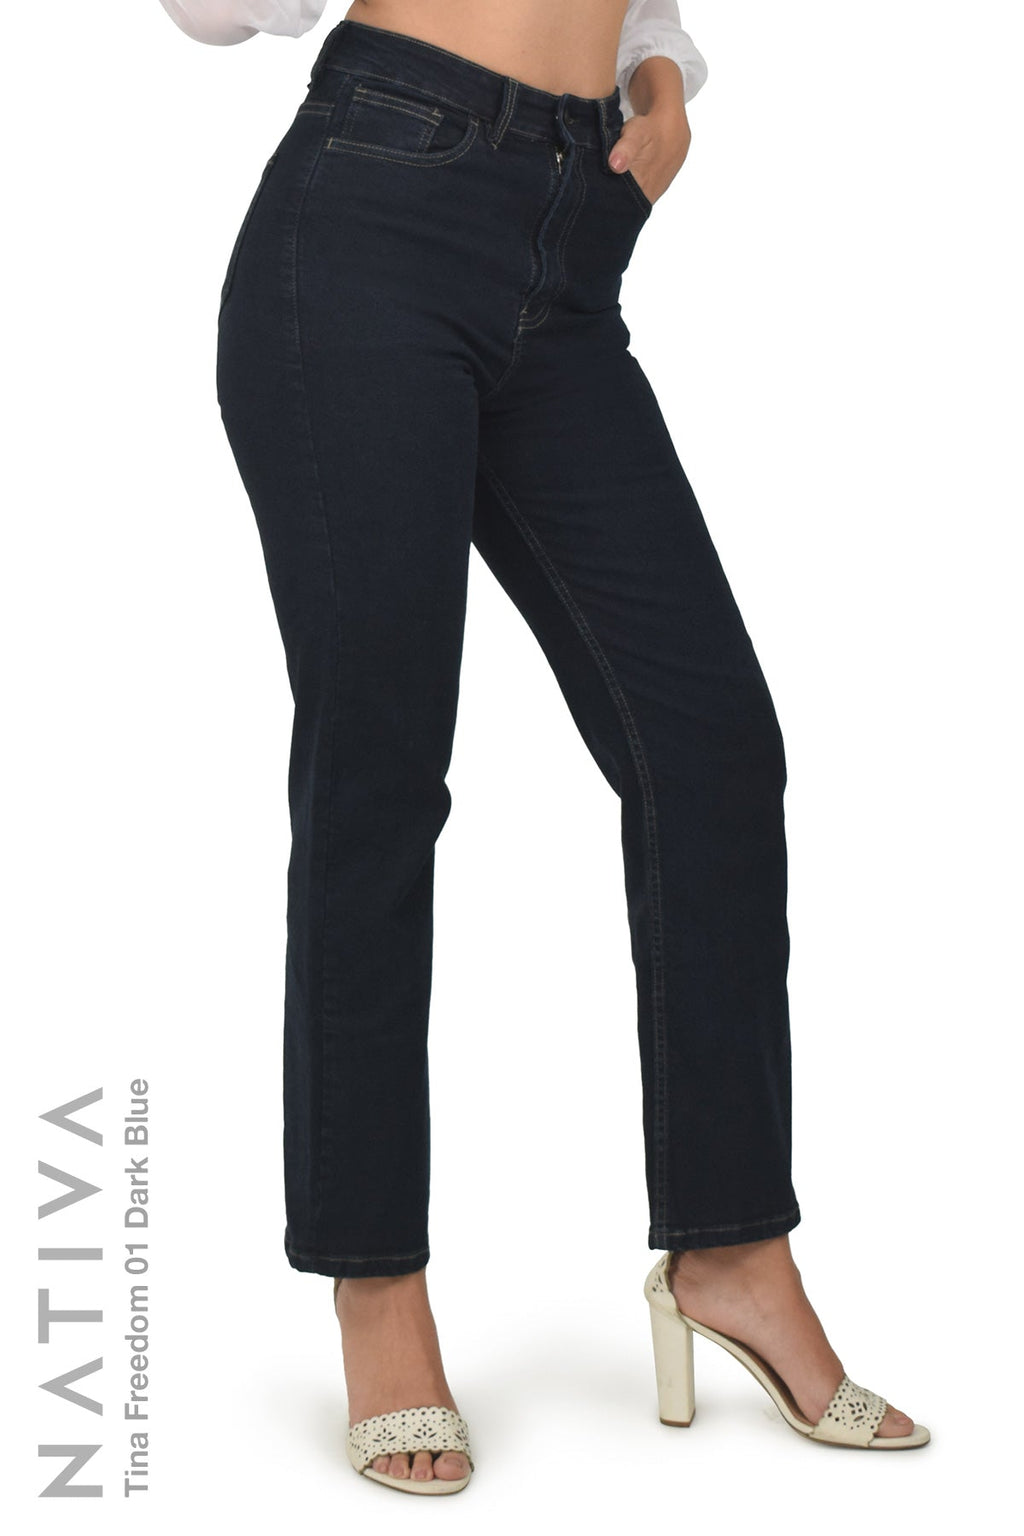 NATIVA,STRETCH JEANS, TINA FREEDOM 01 DARK BLUE. High-Rise Classic Straight  Leg Jeans ESFD (Extreme Stretch Flattering Denim) Fabric Ultra Comfortable  Relaxed Fit Solid Color